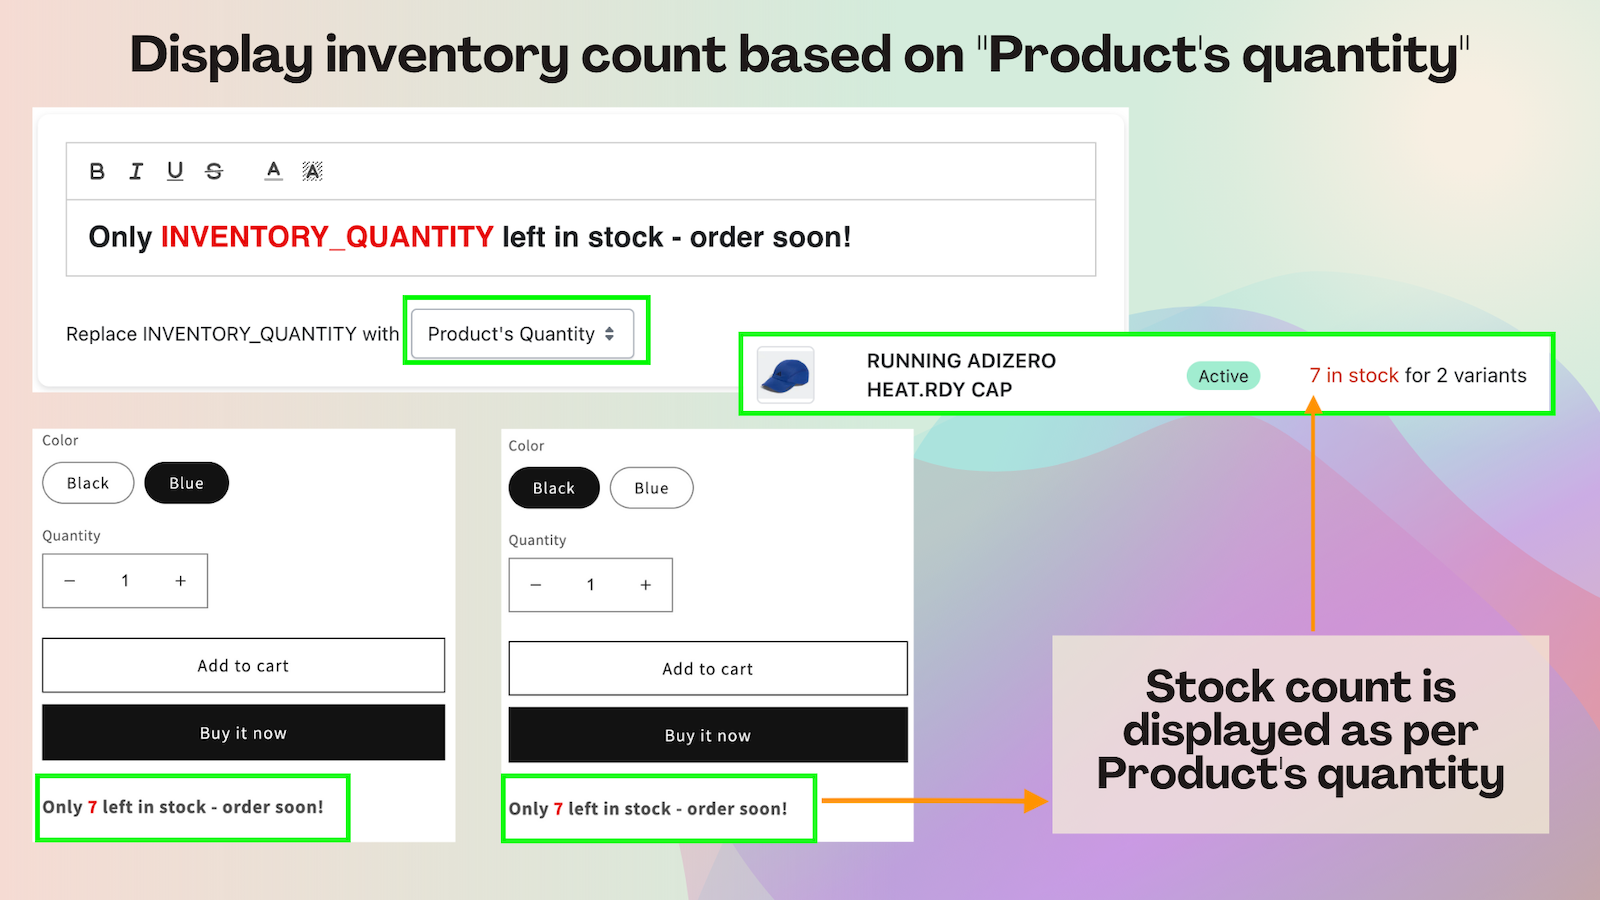 Display stock count as per product's quantity